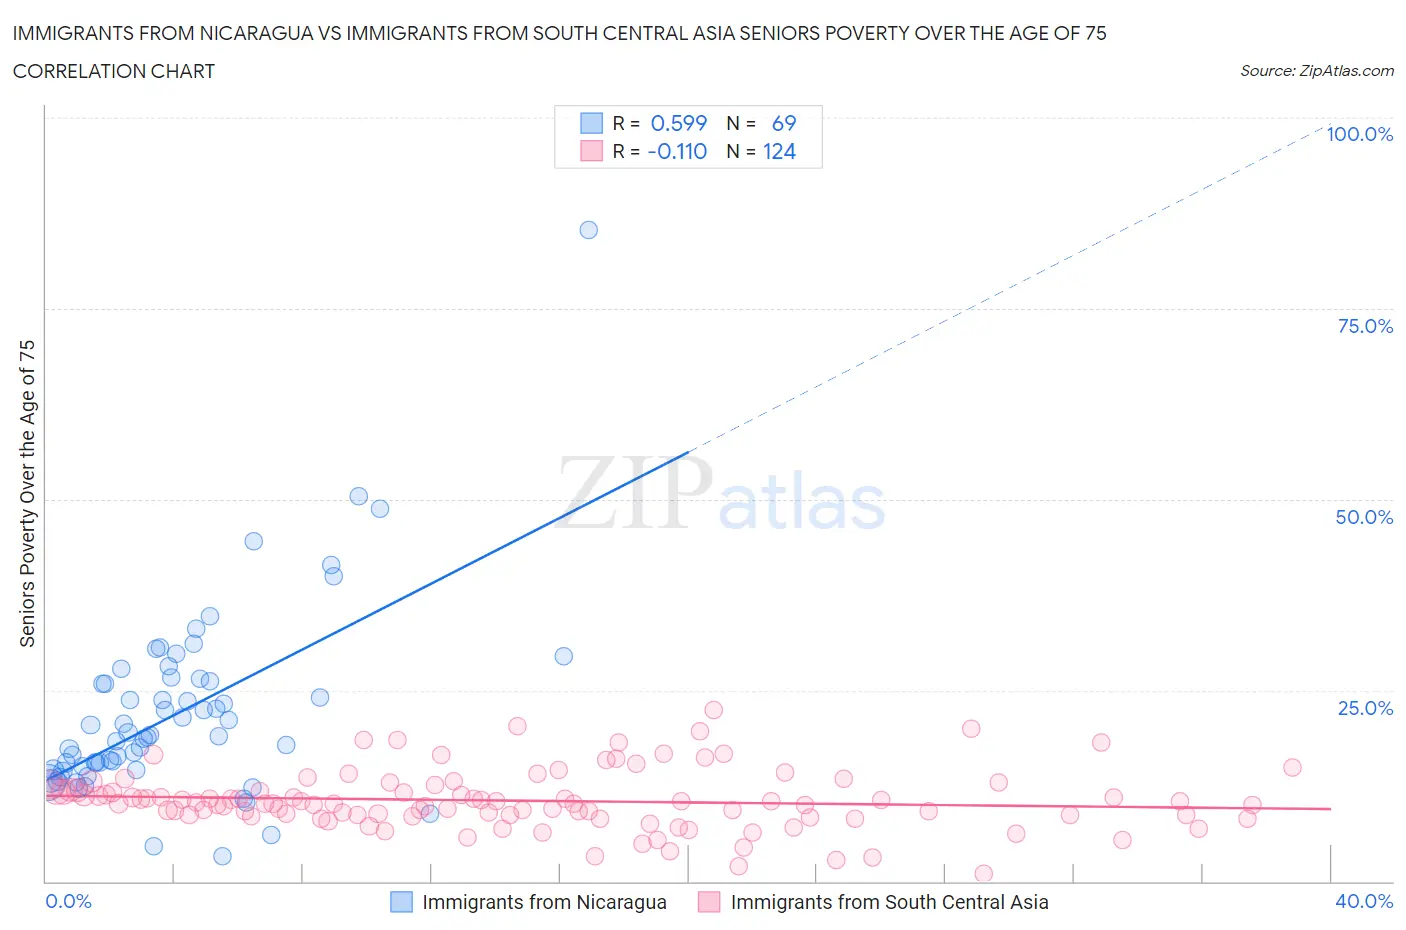 Immigrants from Nicaragua vs Immigrants from South Central Asia Seniors Poverty Over the Age of 75